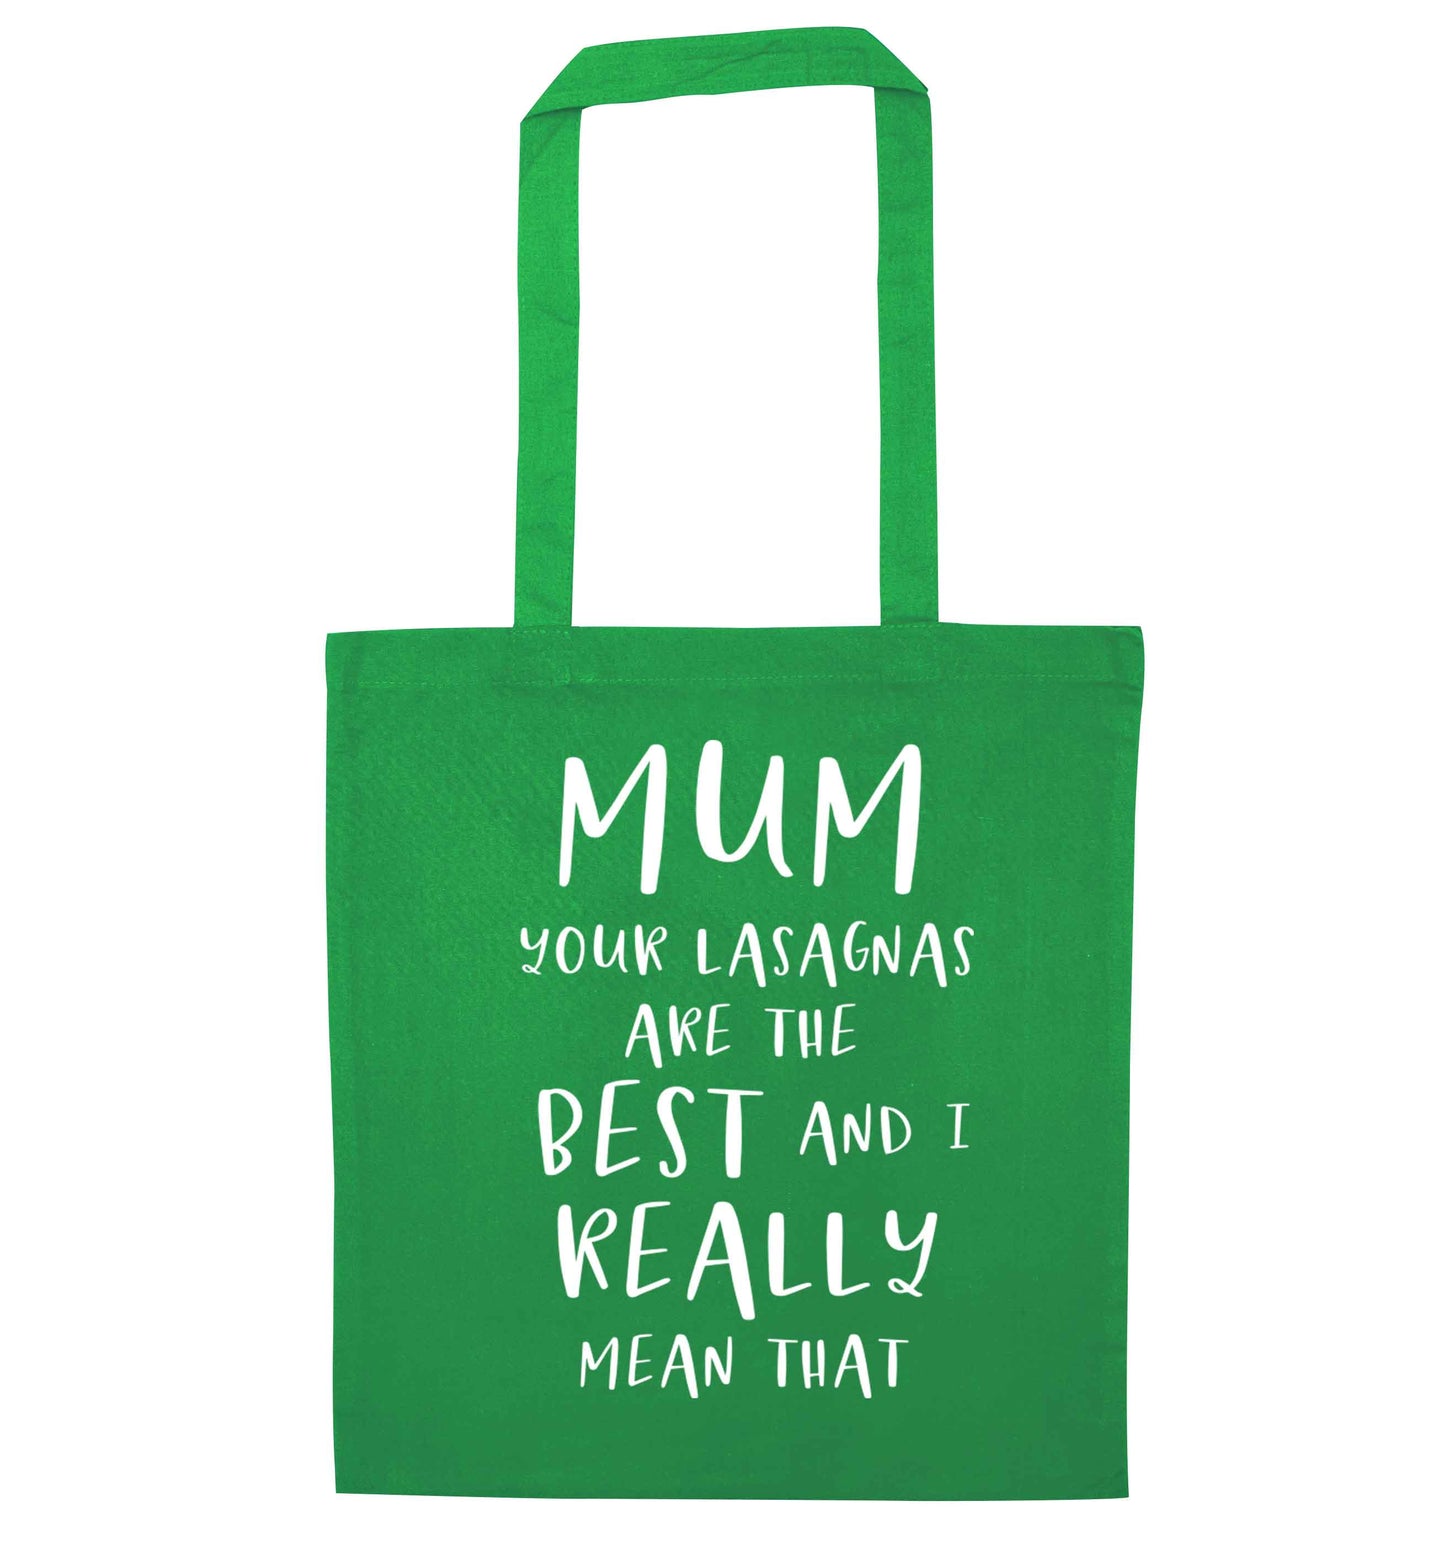 Funny gifts for your mum on mother's dayor her birthday! Mum your lasagnas are the best and I really mean that green tote bag